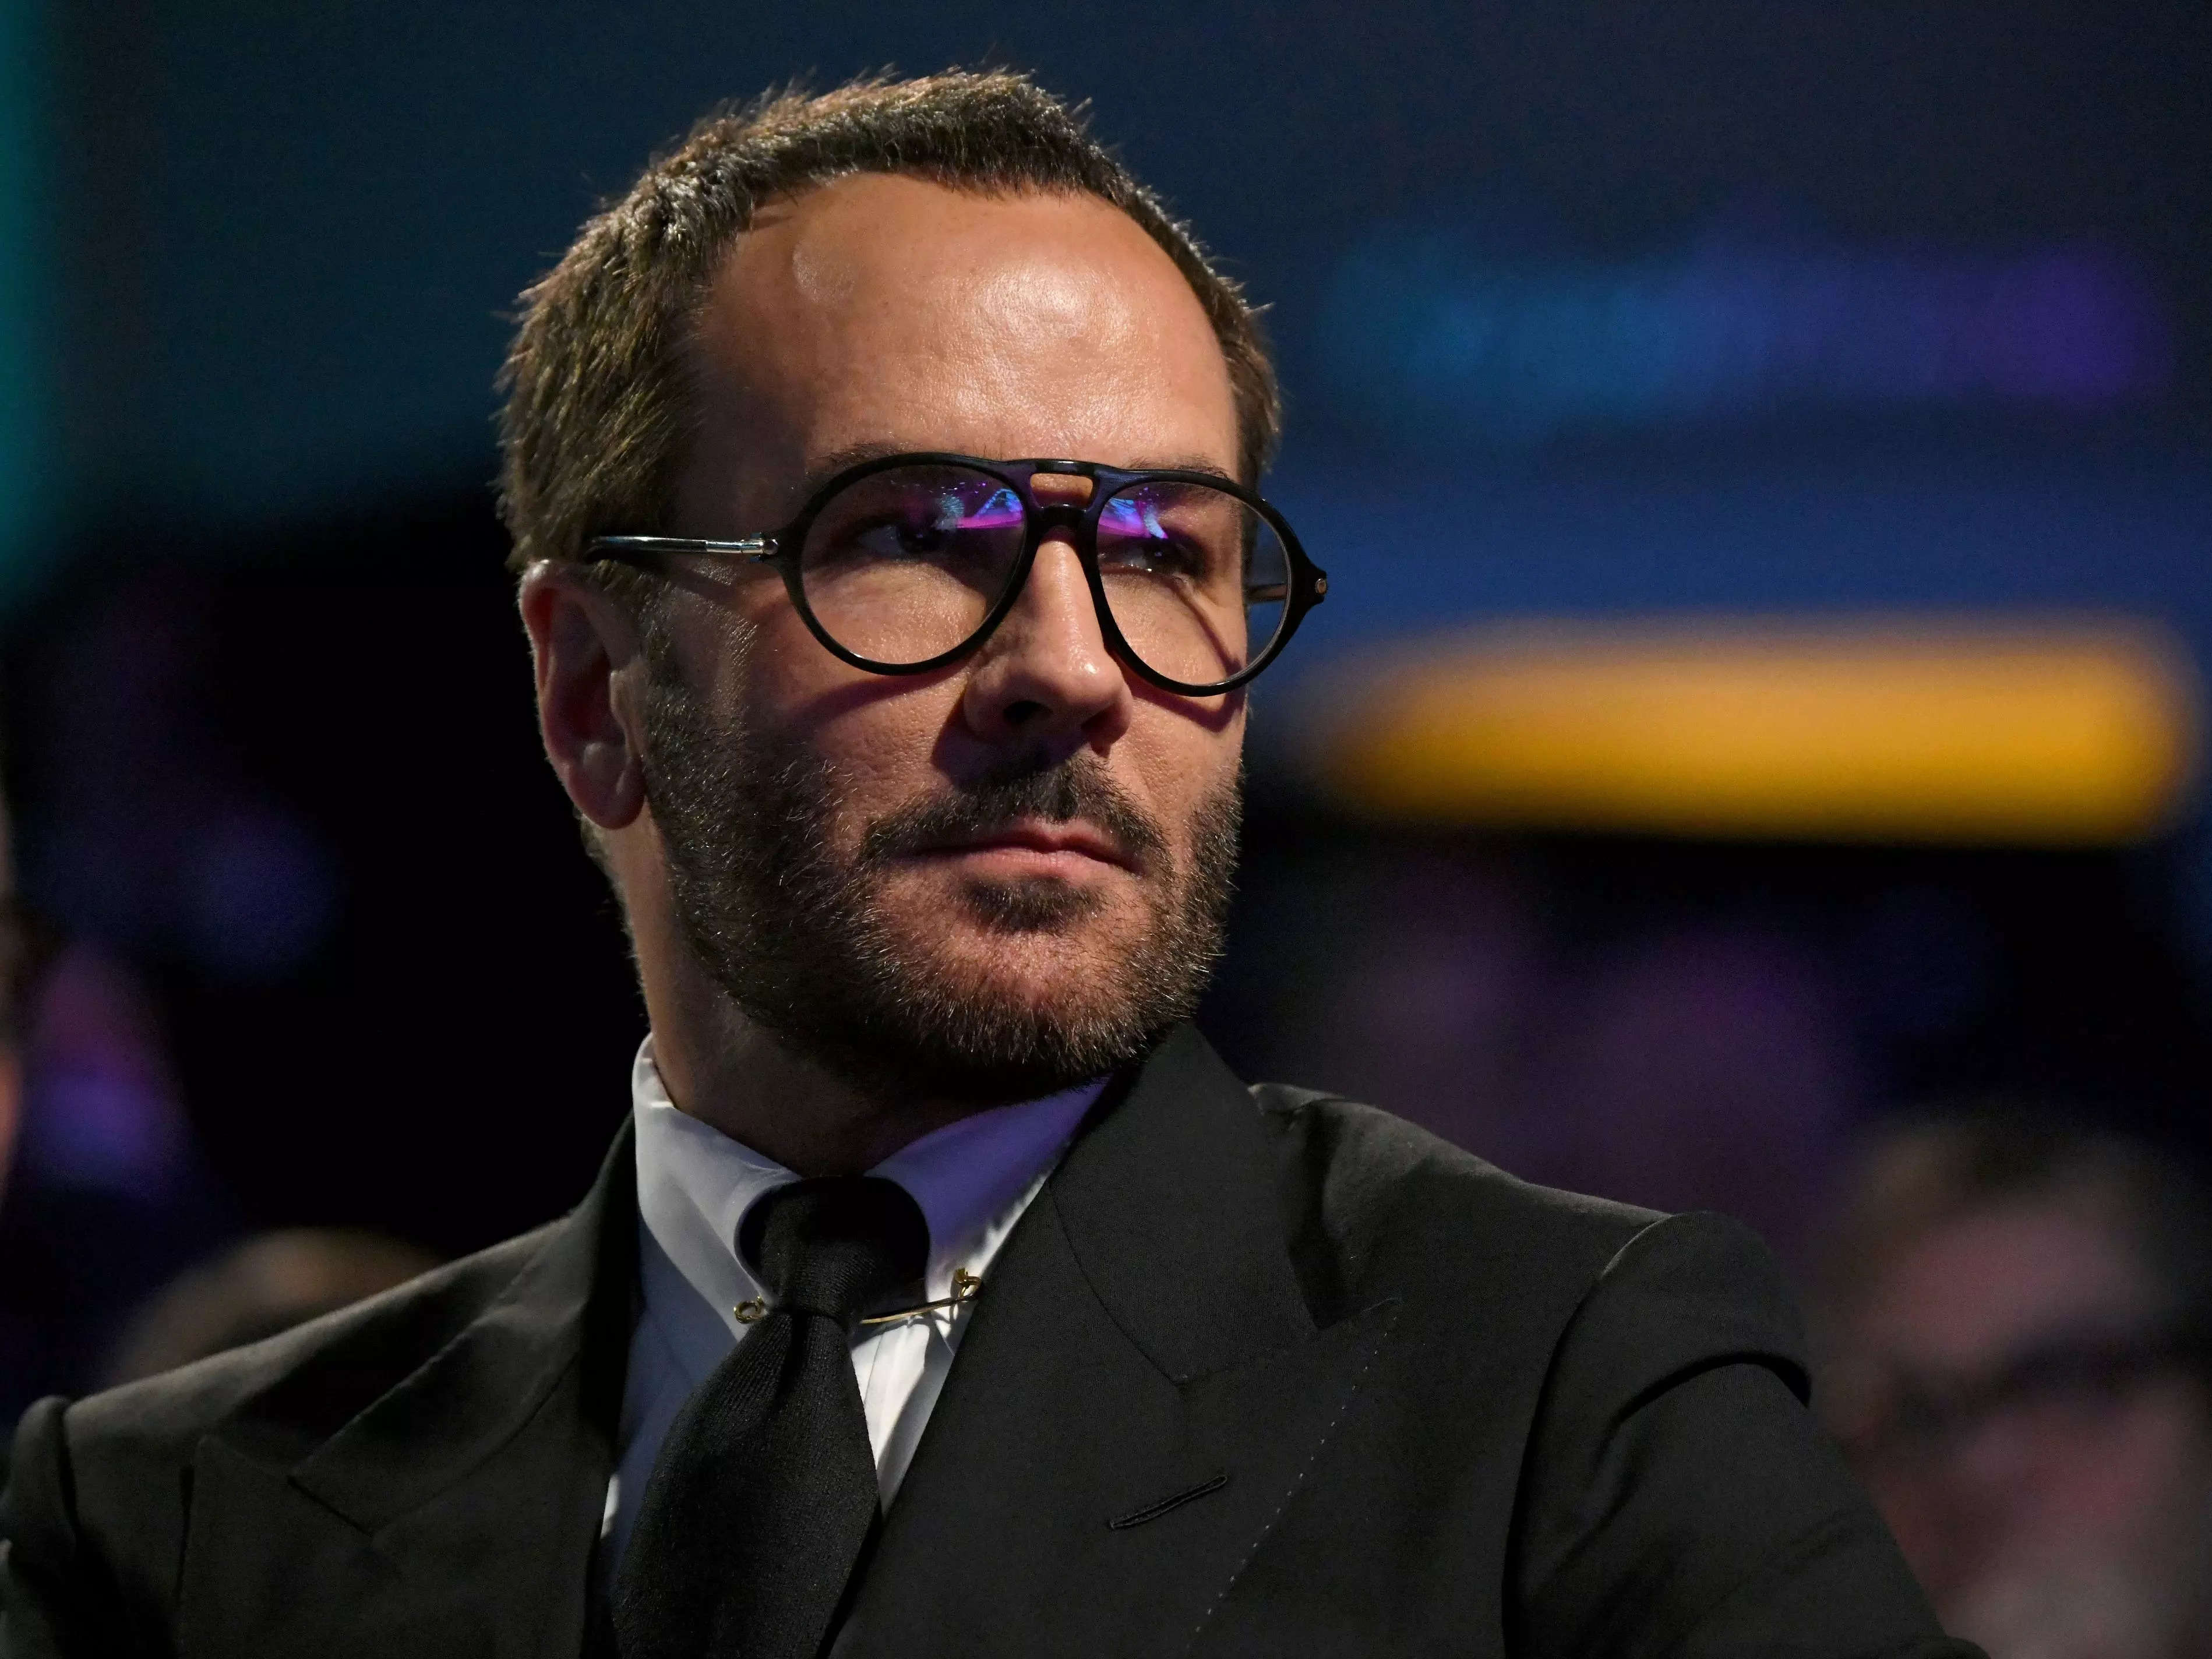 Luxury brand Tom Ford appoints a new CEO among switch up at the top